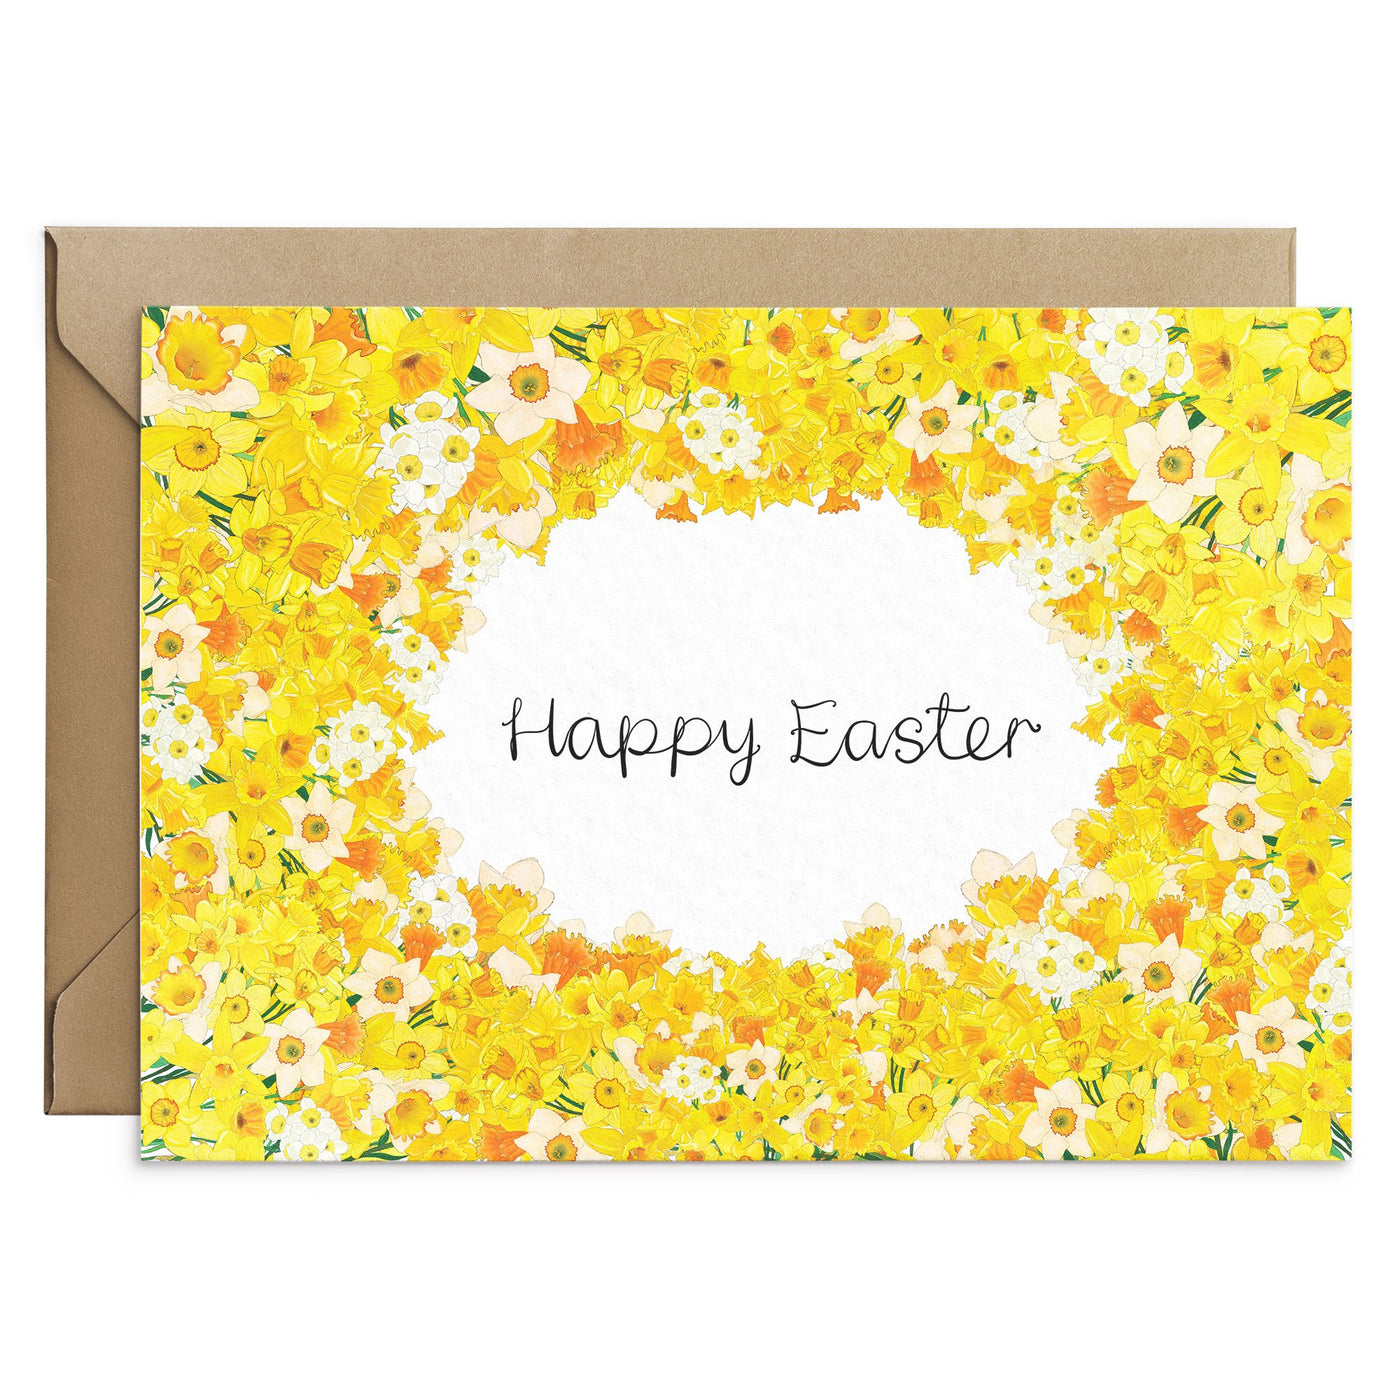 Happy Easter Daffodils Card - Poppins & Co.